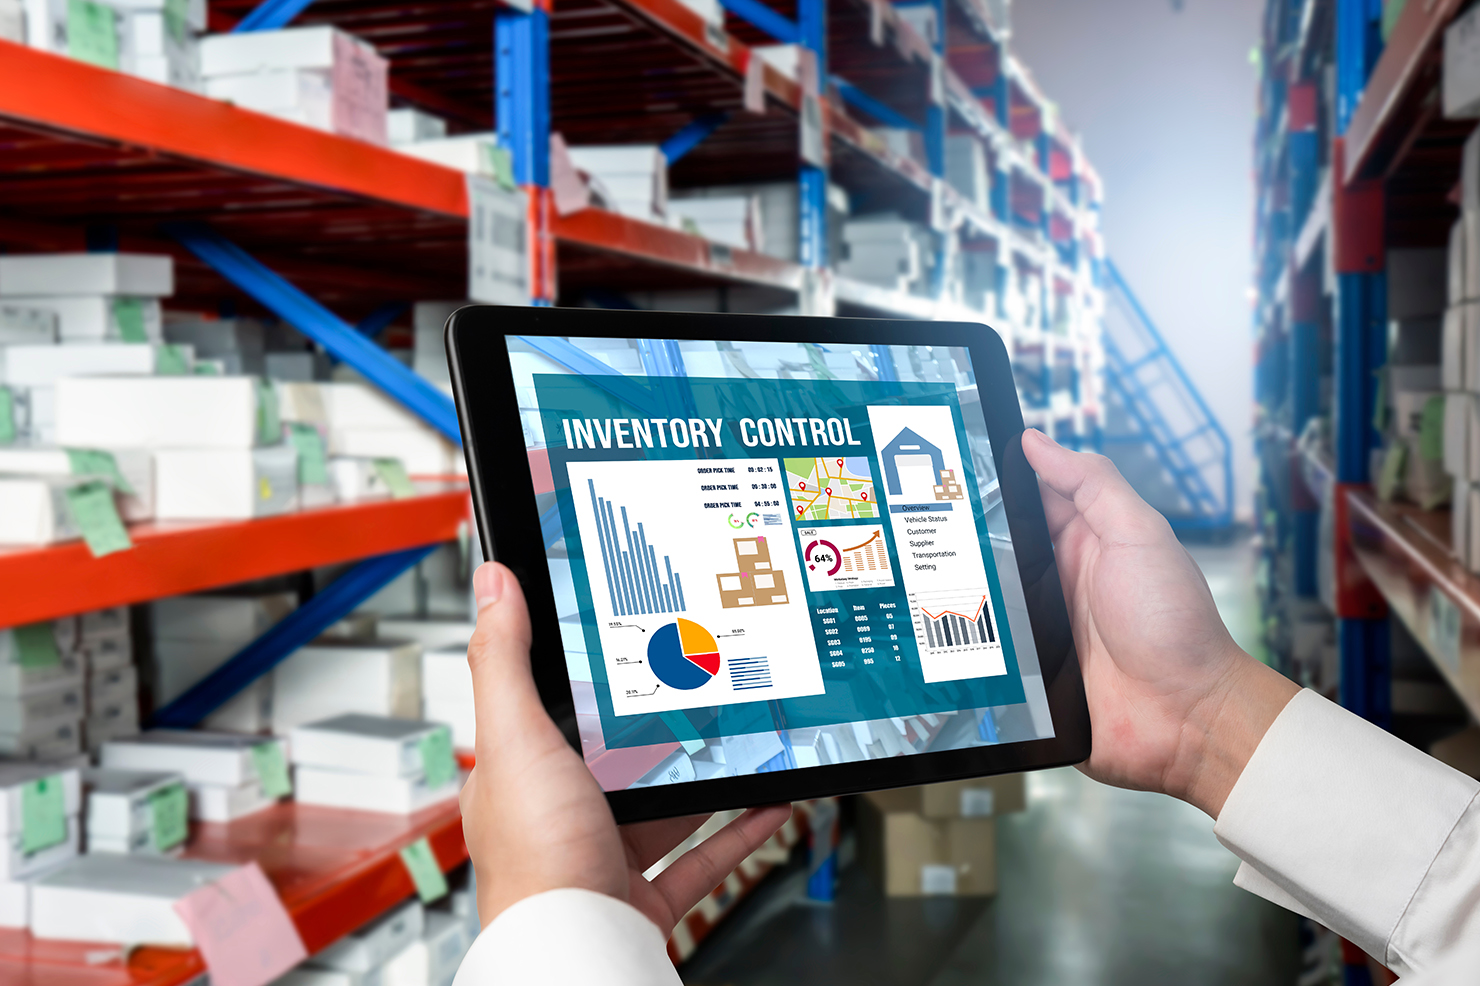 6 Common Business Problems a Rental Asset Management System Can Solve - Poor Inventory Control